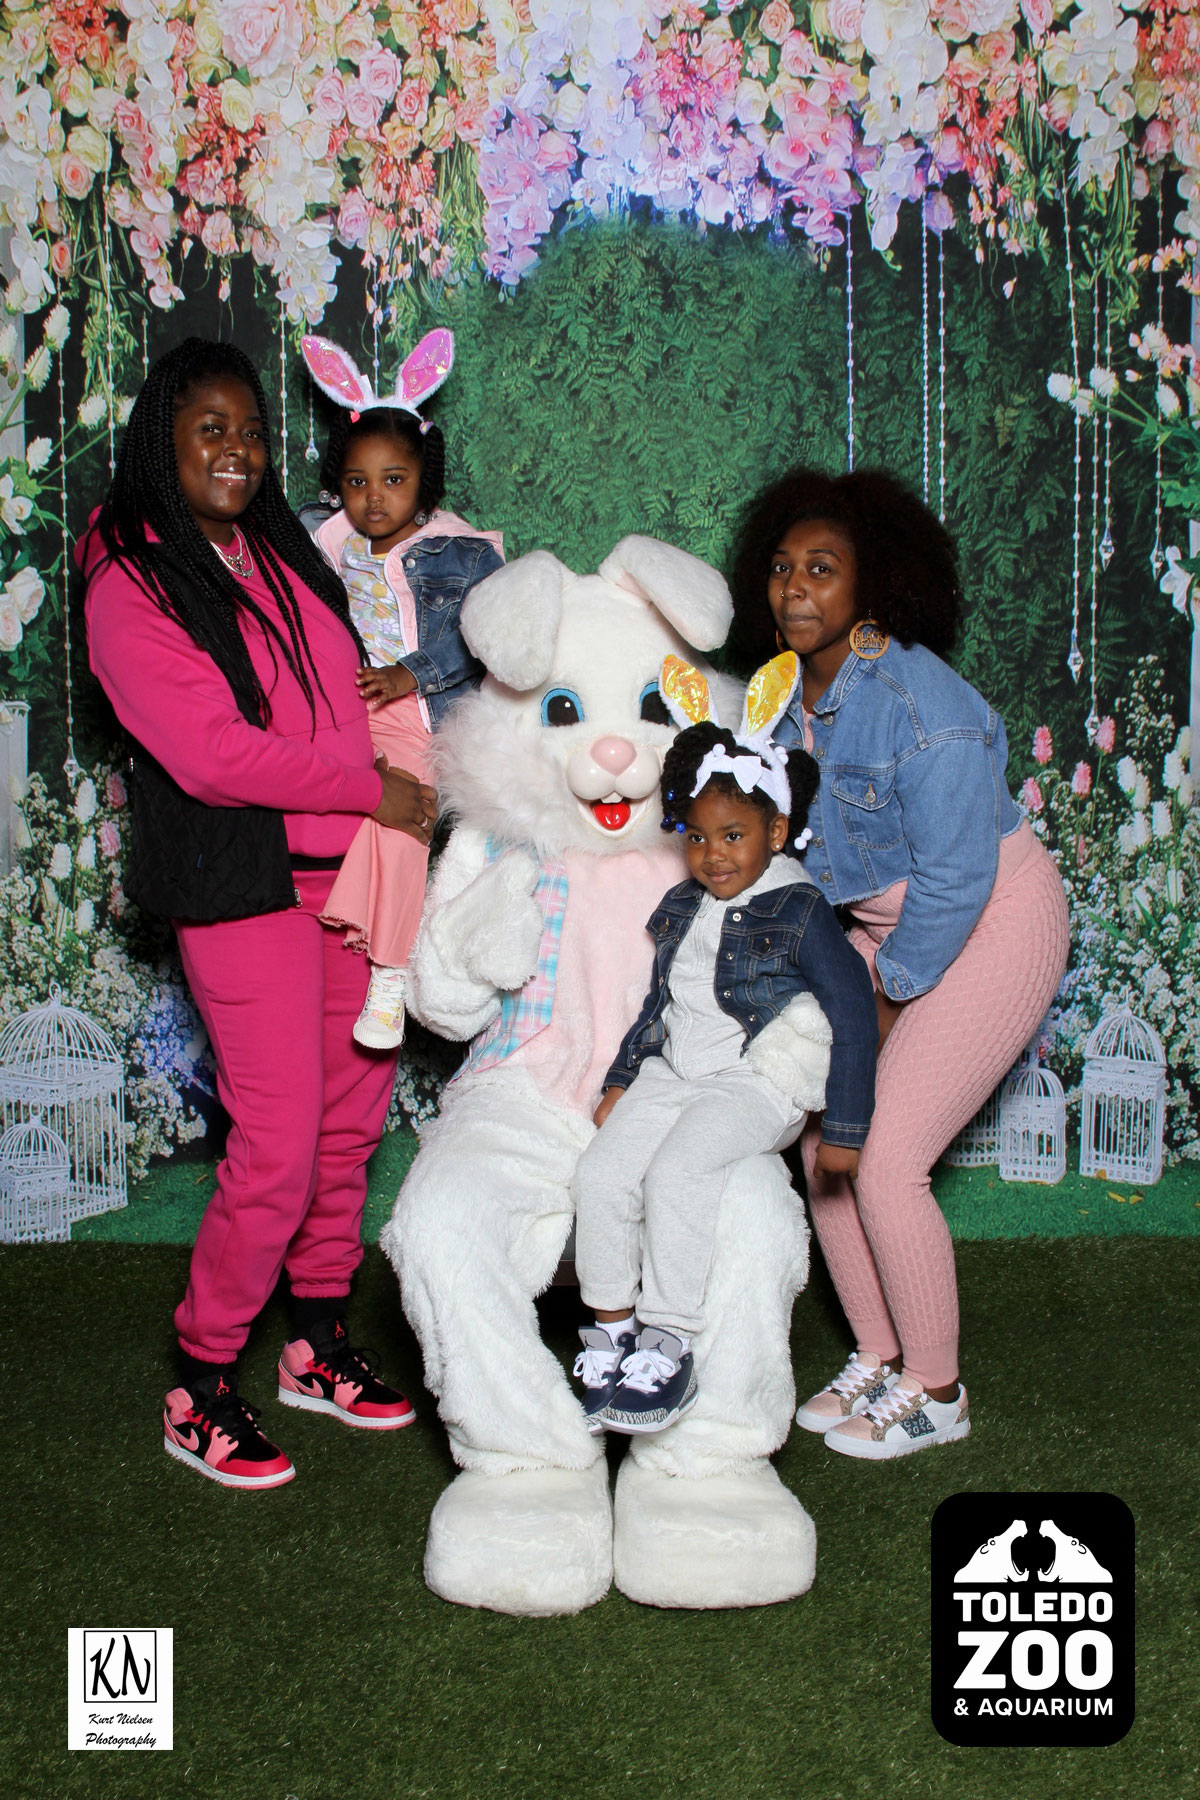 Easter Bunny photos at the Toledo Zoo